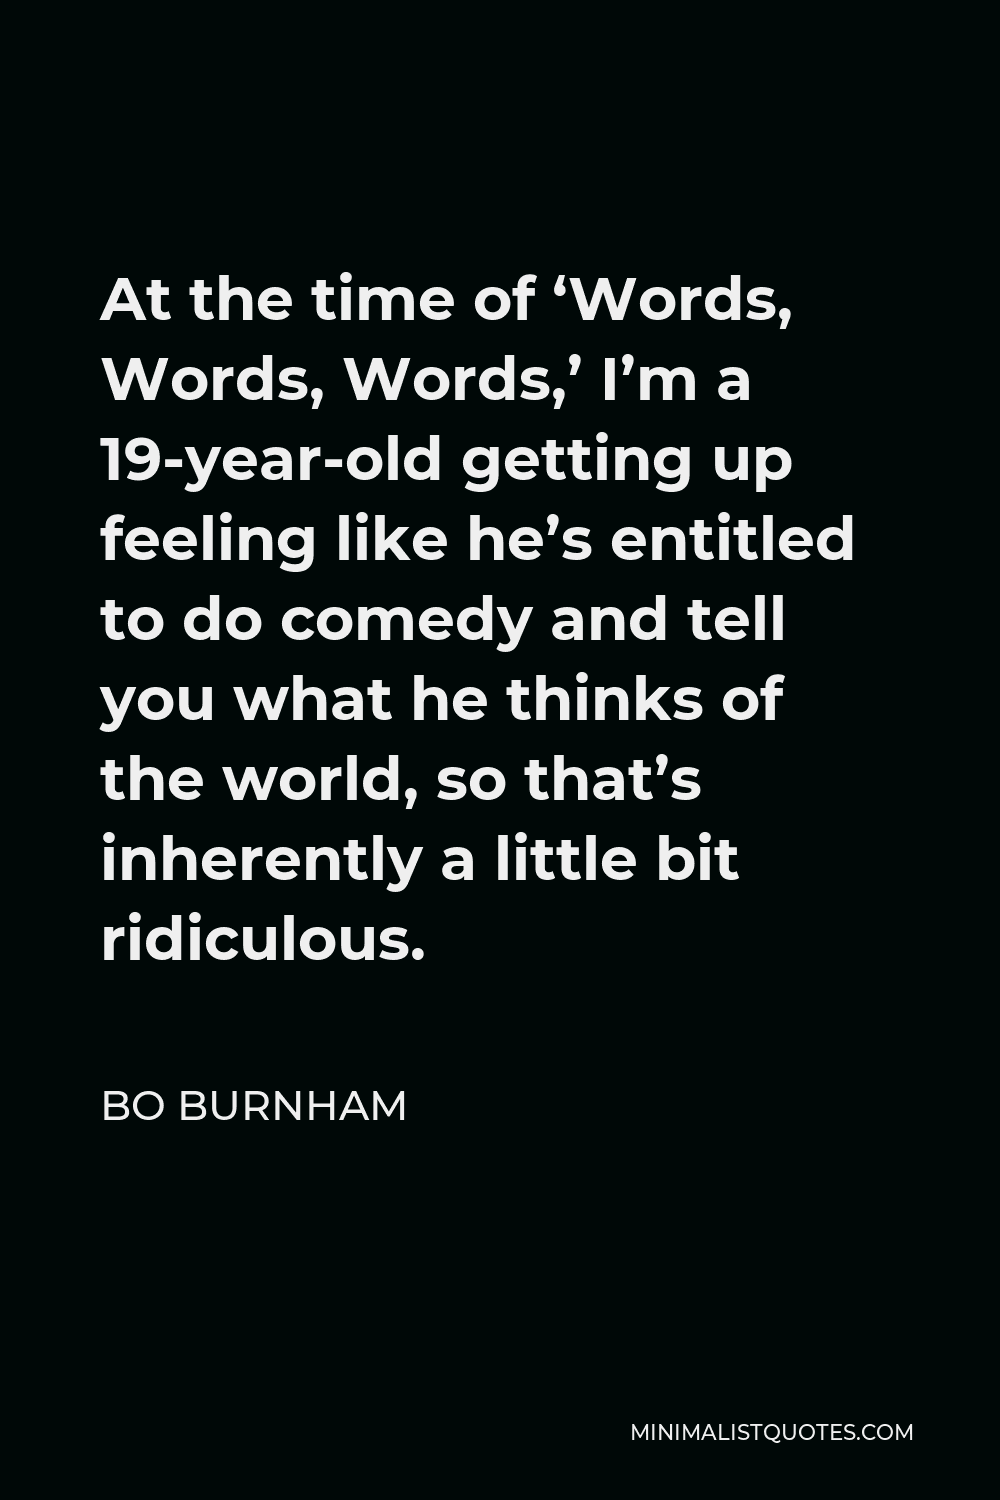 Bo Burnham Quote - At the time of ‘Words, Words, Words,’ I’m a 19-year-old getting up feeling like he’s entitled to do comedy and tell you what he thinks of the world, so that’s inherently a little bit ridiculous.